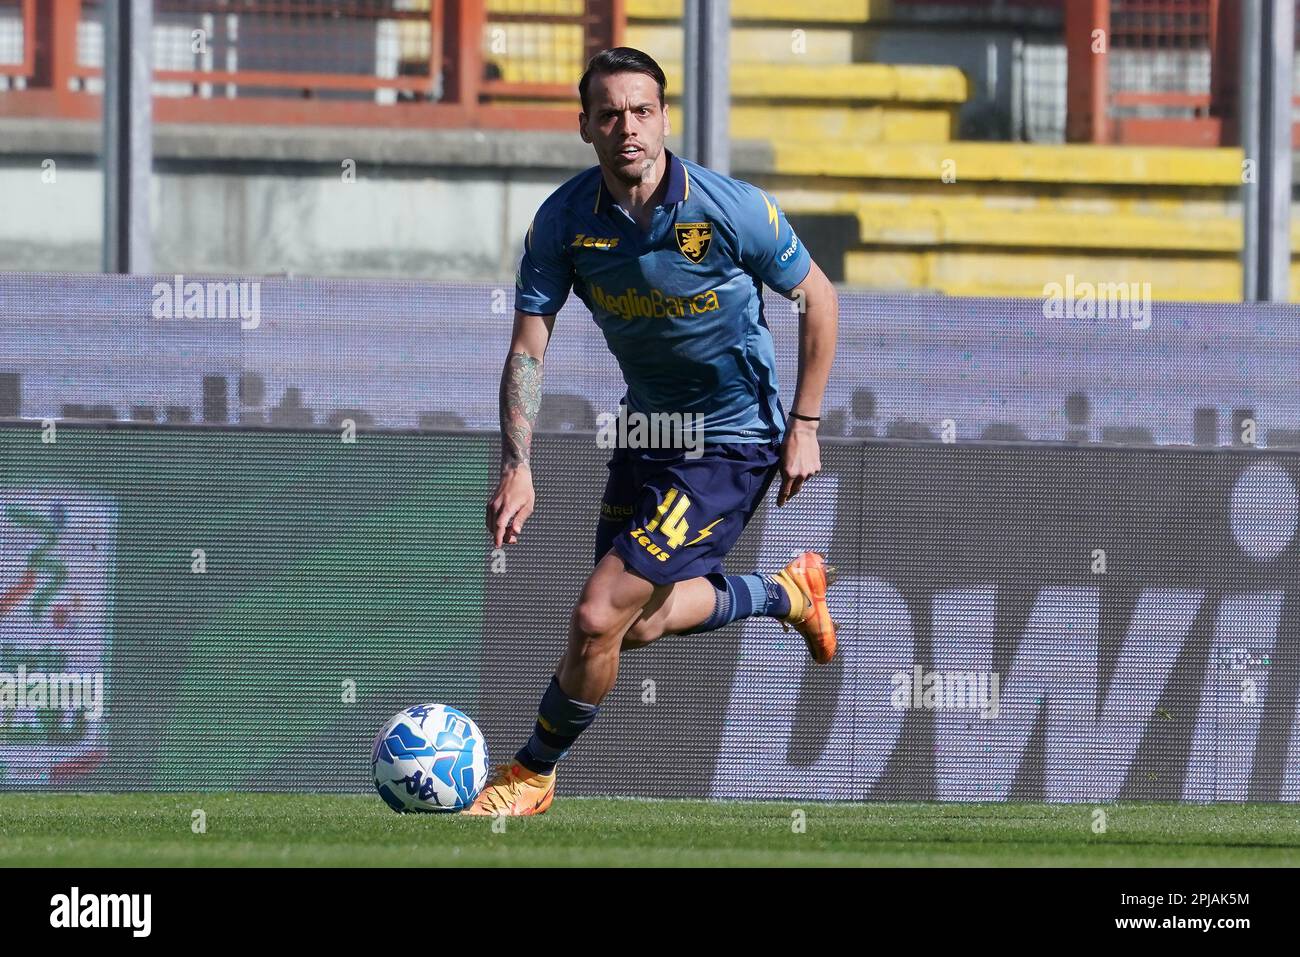 Perugia, Italy. 02nd Apr, 2023. gelli francesco (n.14 frosinone calcio) during AC Perugia vs Frosinone Calcio, Italian soccer Serie B match in Perugia, Italy, April 02 2023 Credit: Independent Photo Agency/Alamy Live News Stock Photo